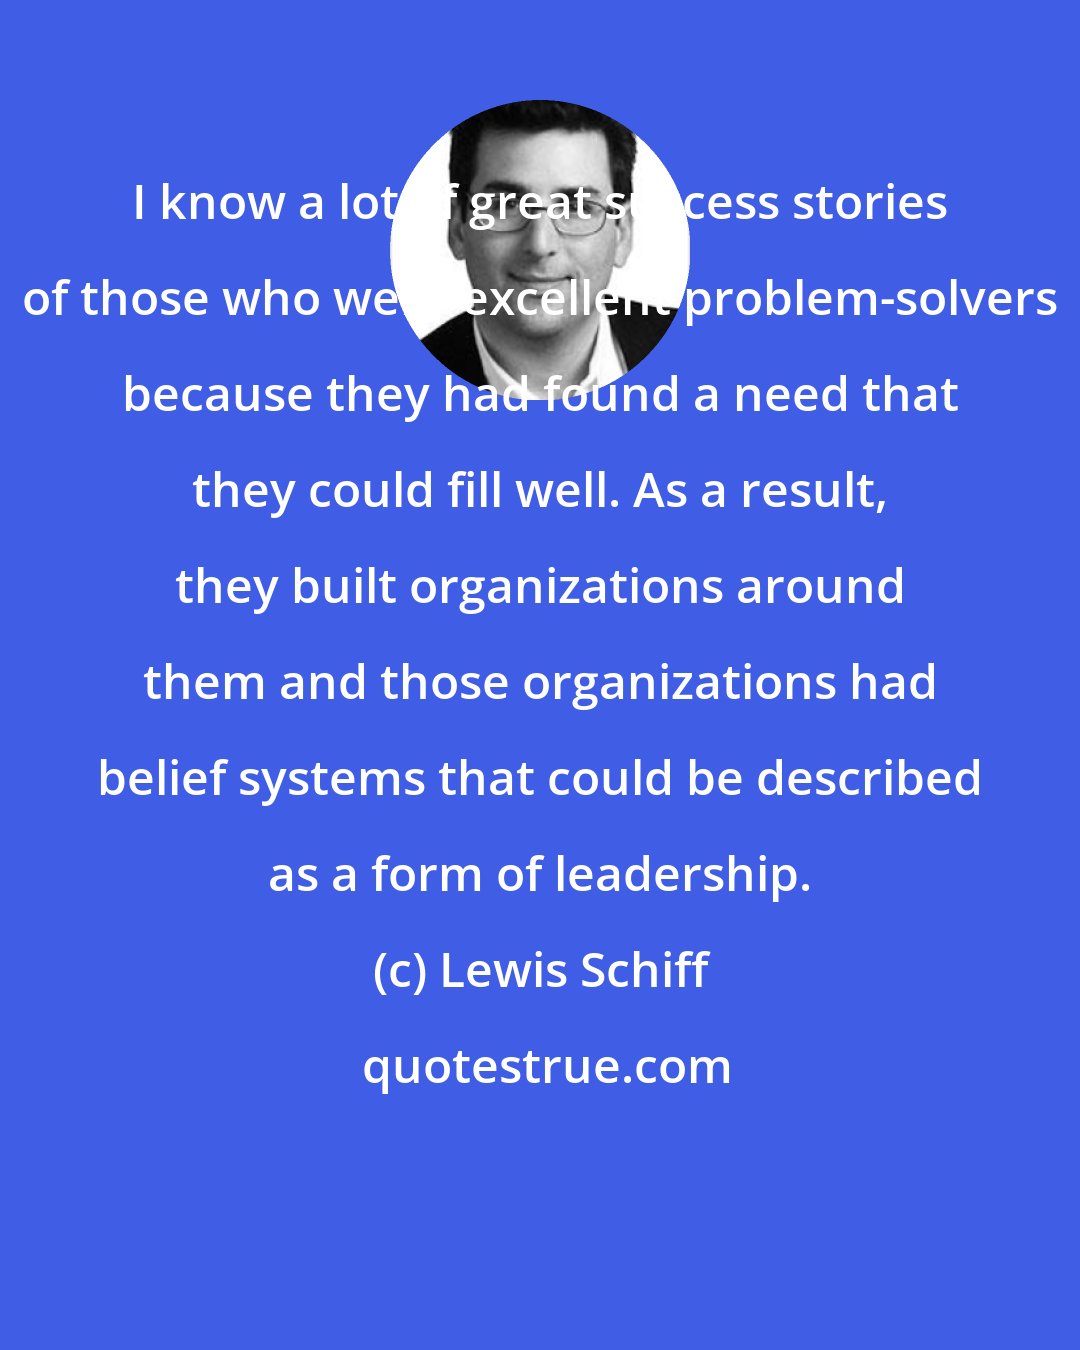 Lewis Schiff: I know a lot of great success stories of those who were excellent problem-solvers because they had found a need that they could fill well. As a result, they built organizations around them and those organizations had belief systems that could be described as a form of leadership.